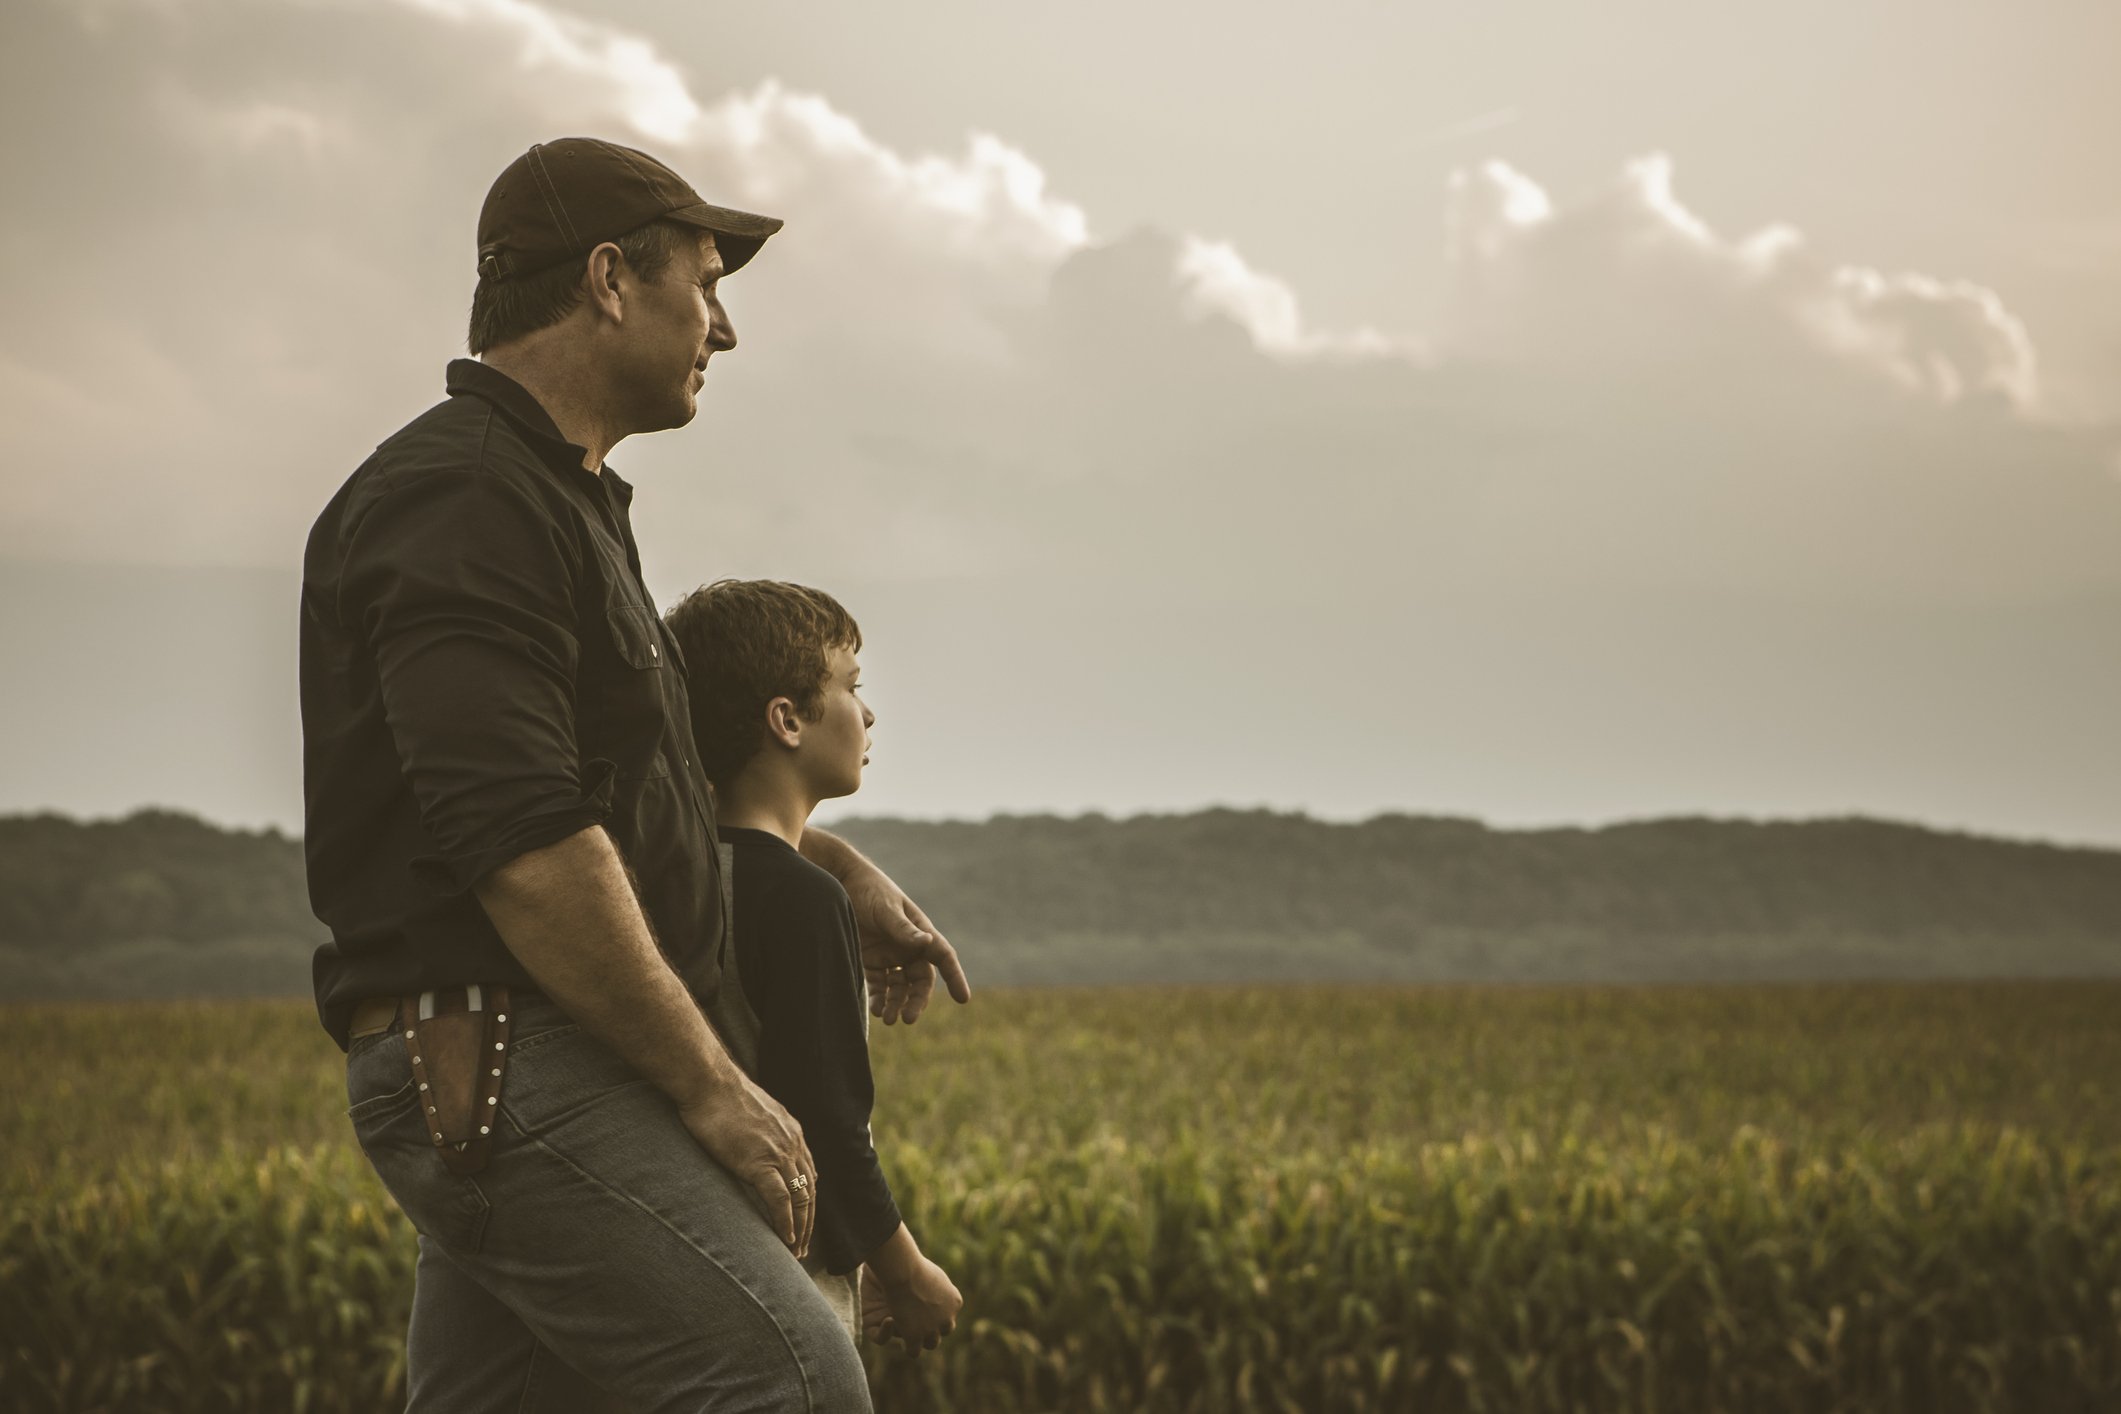 A photo of a father and son overlooking a crop field. | Photo: Getty Images